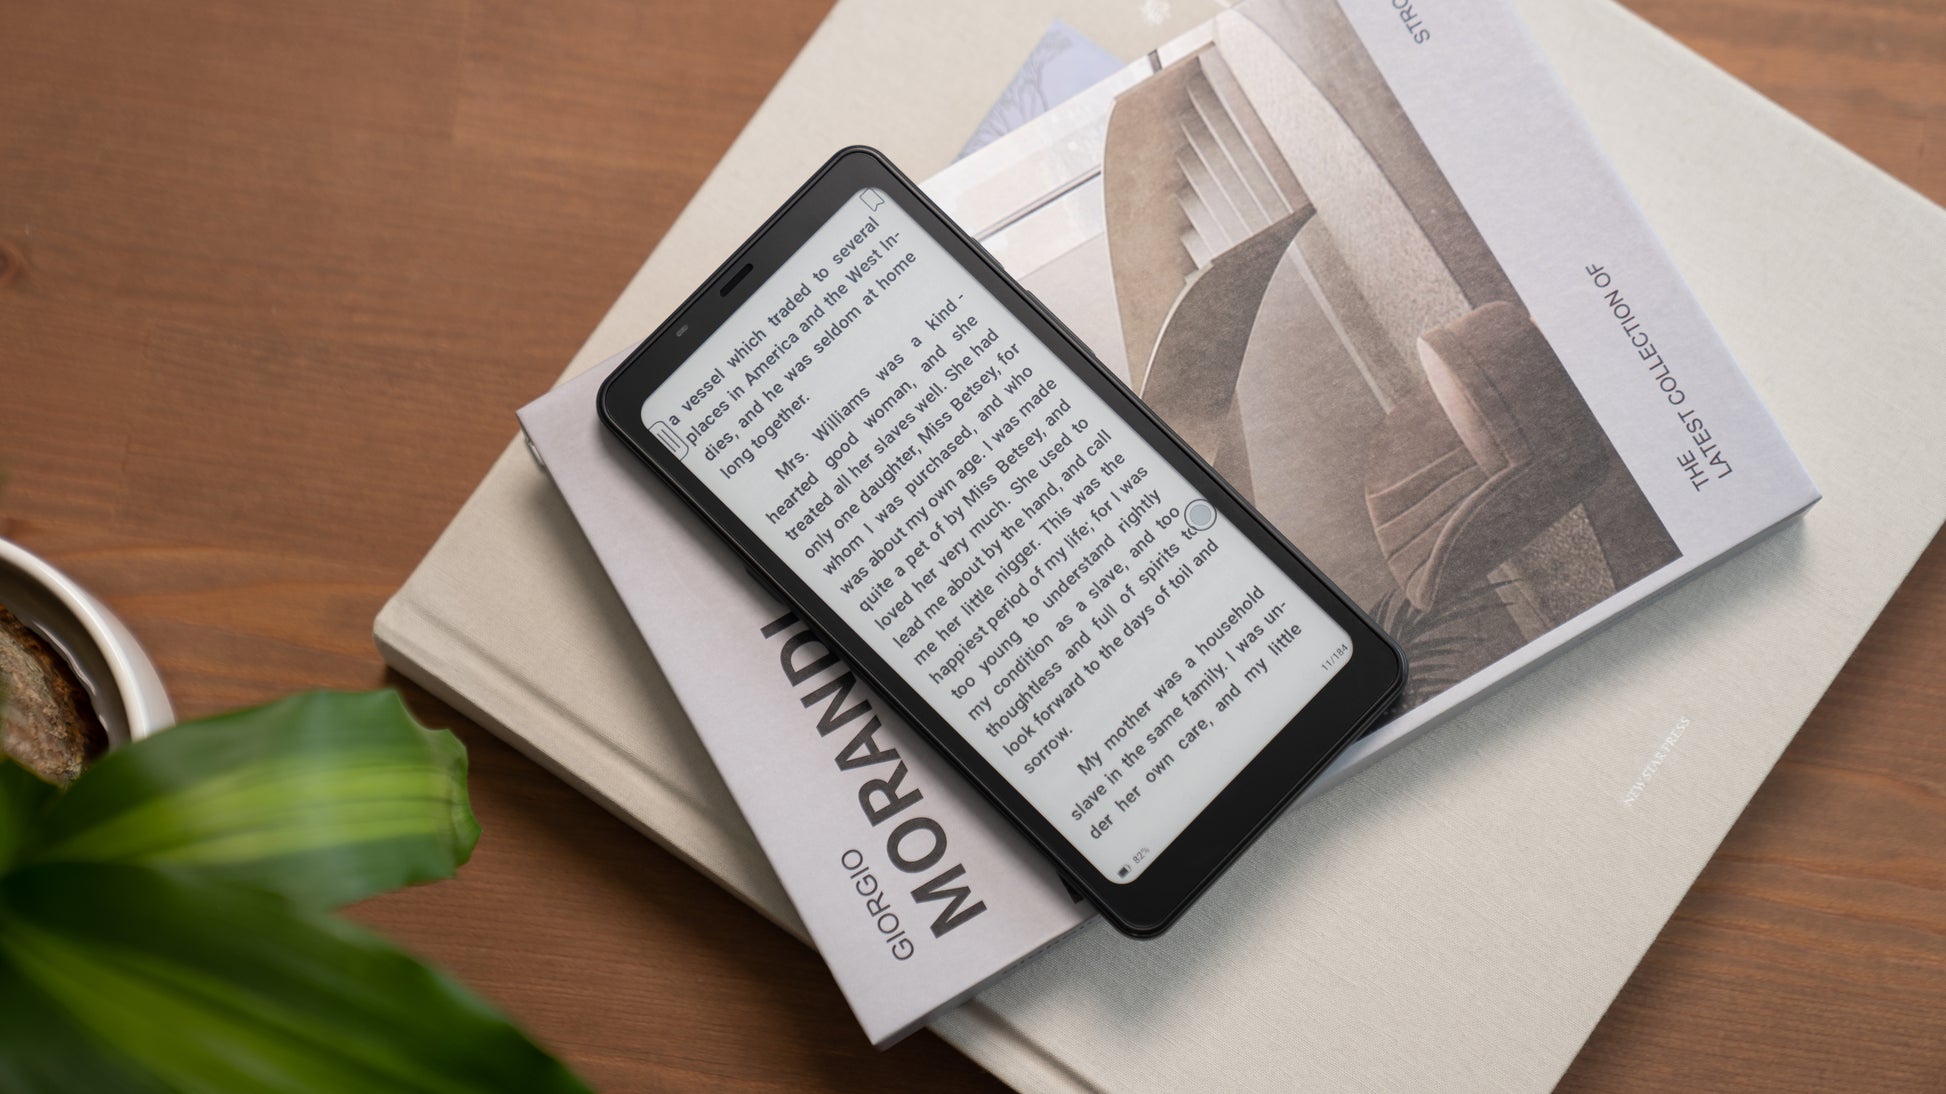 The New Onyx Boox Palma Is the Smallest E-Book Reader In Town